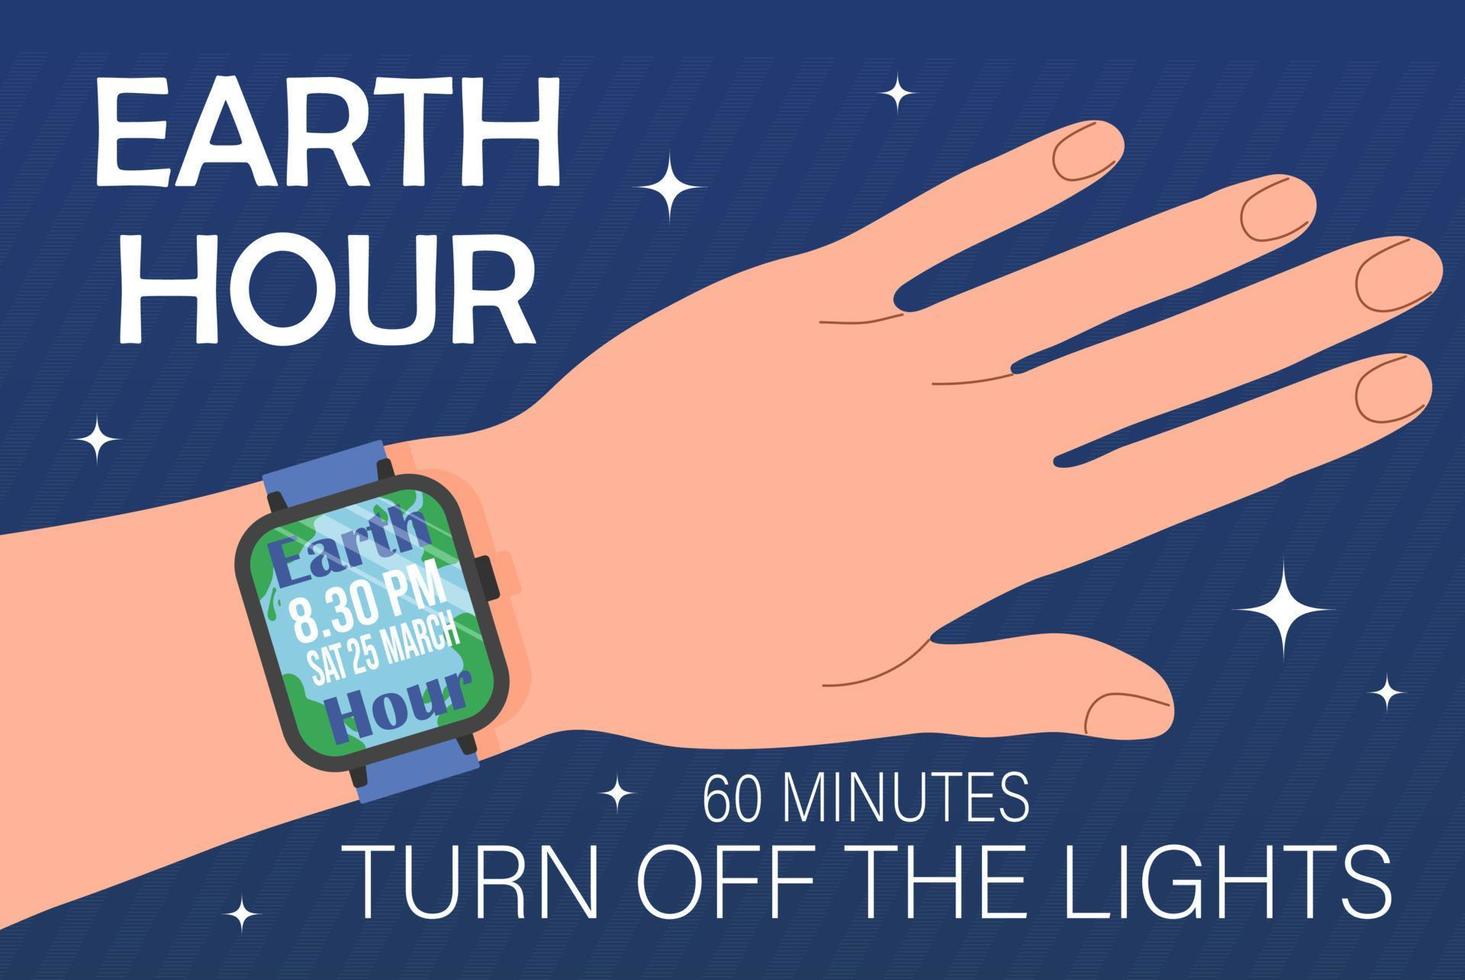 Earth hour Turn off the lights vector illustration